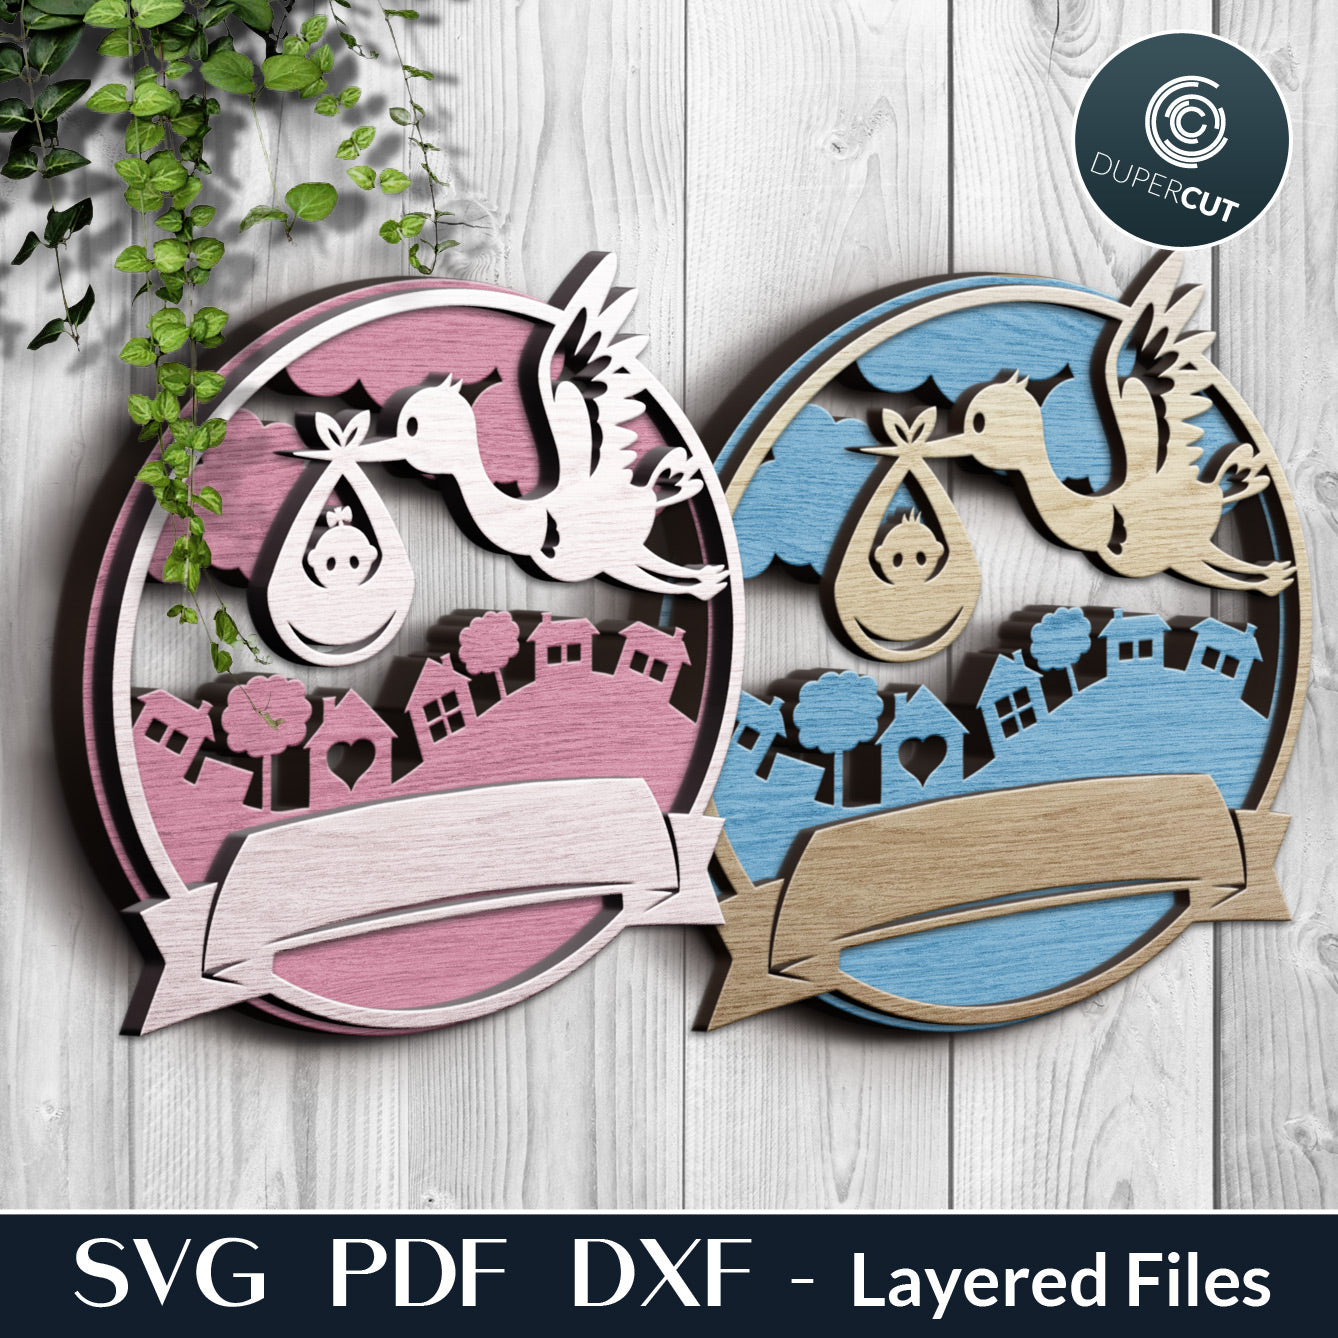 Baby shower gift, personalized round - stork with new baby - layered files. SVG PDF DXF template for laser cutting for Glowforge, CNC plasma machines.